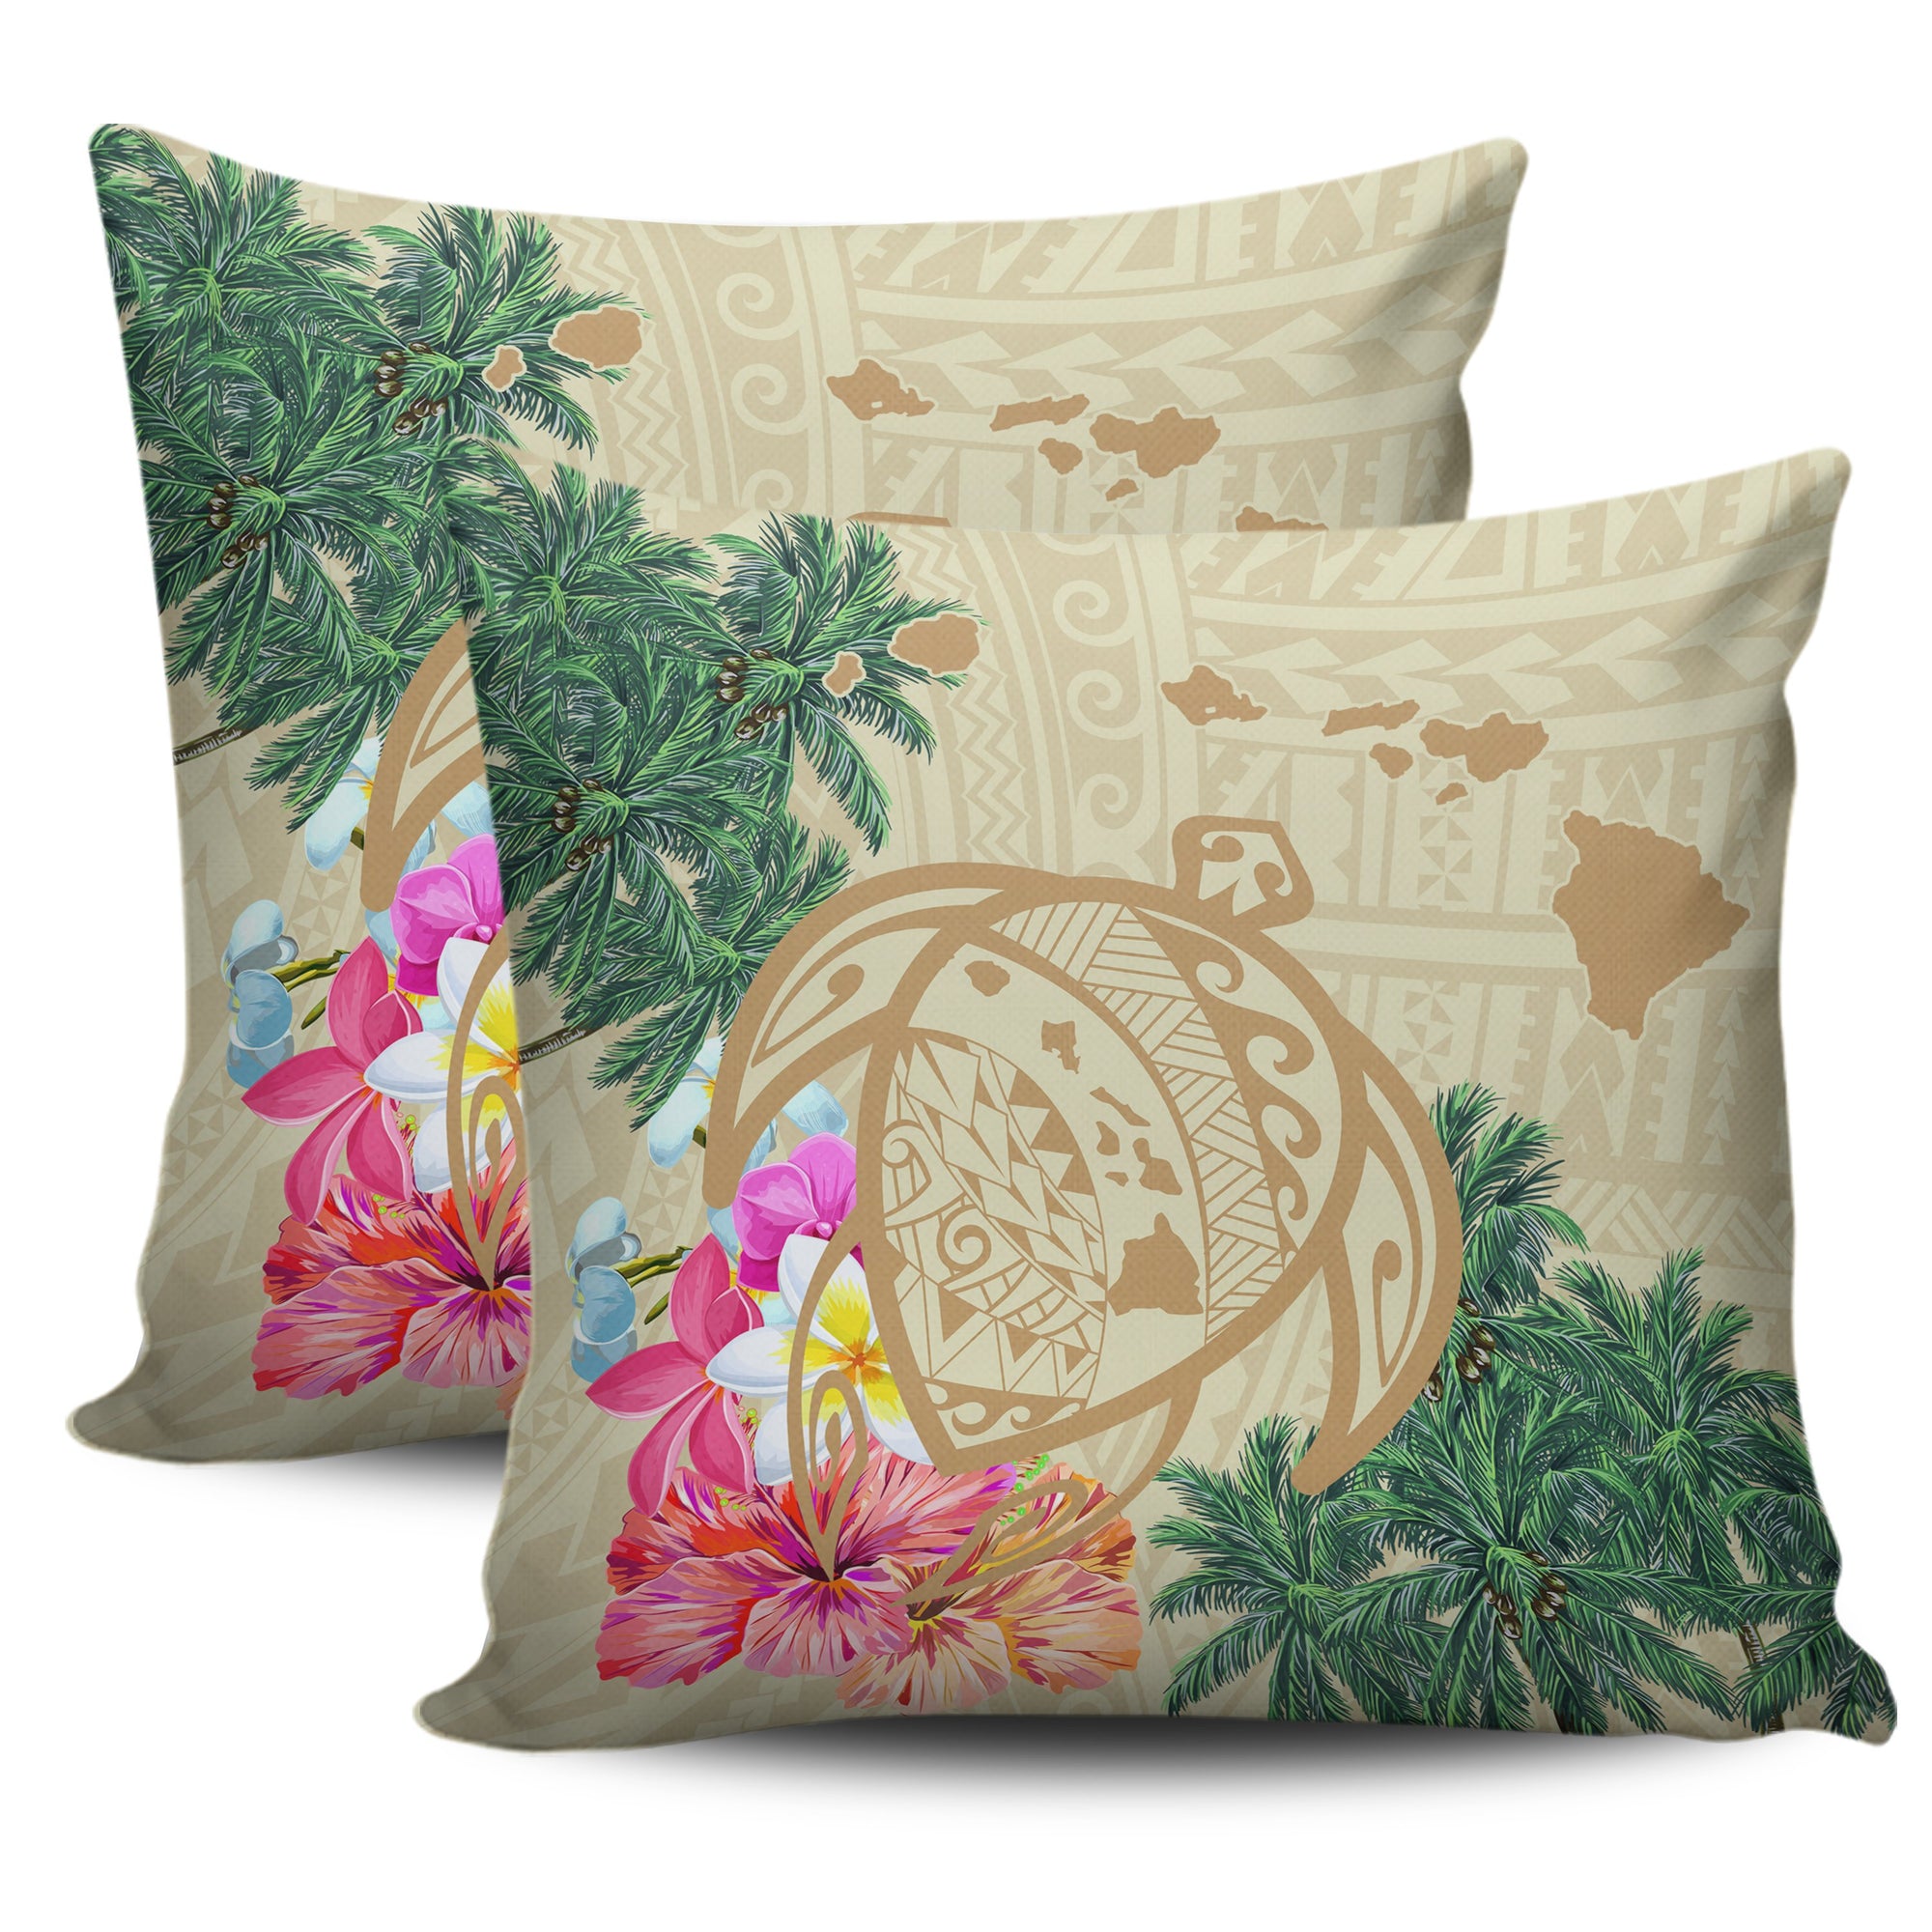 Hawaii Kanaka Maoli Polynesian Flowers Turtle Pillow Covers One Size Zippered Pillow Cases 18"x 18" (Twin Sides) (Set of 2) Beige - Polynesian Pride